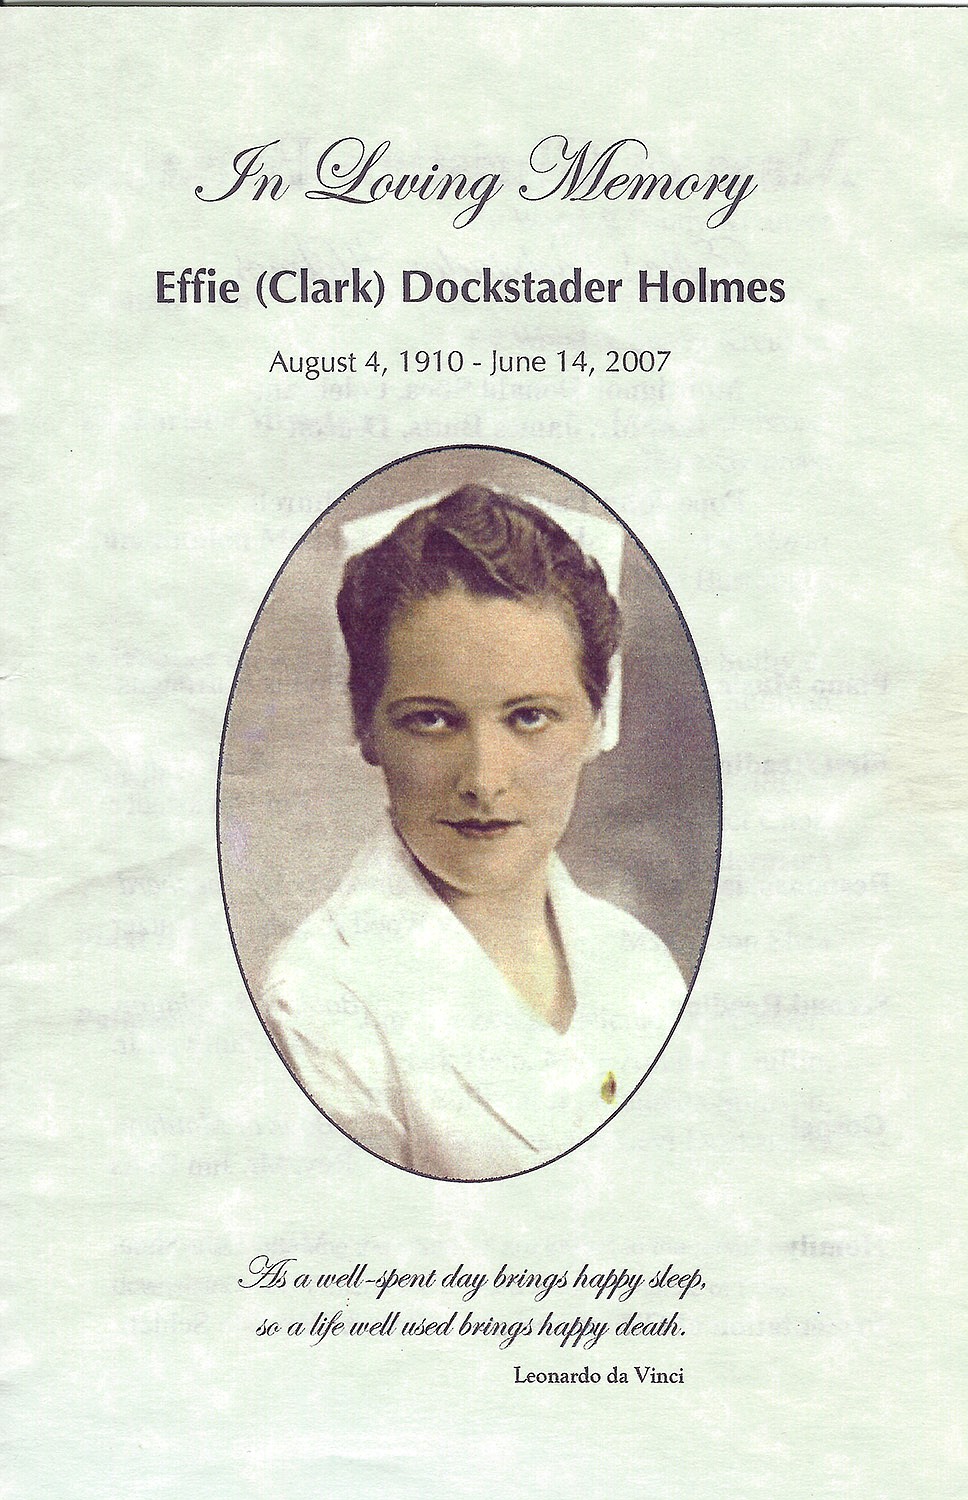 Dockstrader's obituary, where her composite photo from her nursing days can be seen. Dockstrader graduated from the Spokane Sacred Heart School of Nursing then moved to Missoula to start her career after graduation. (Bigfork History Project)